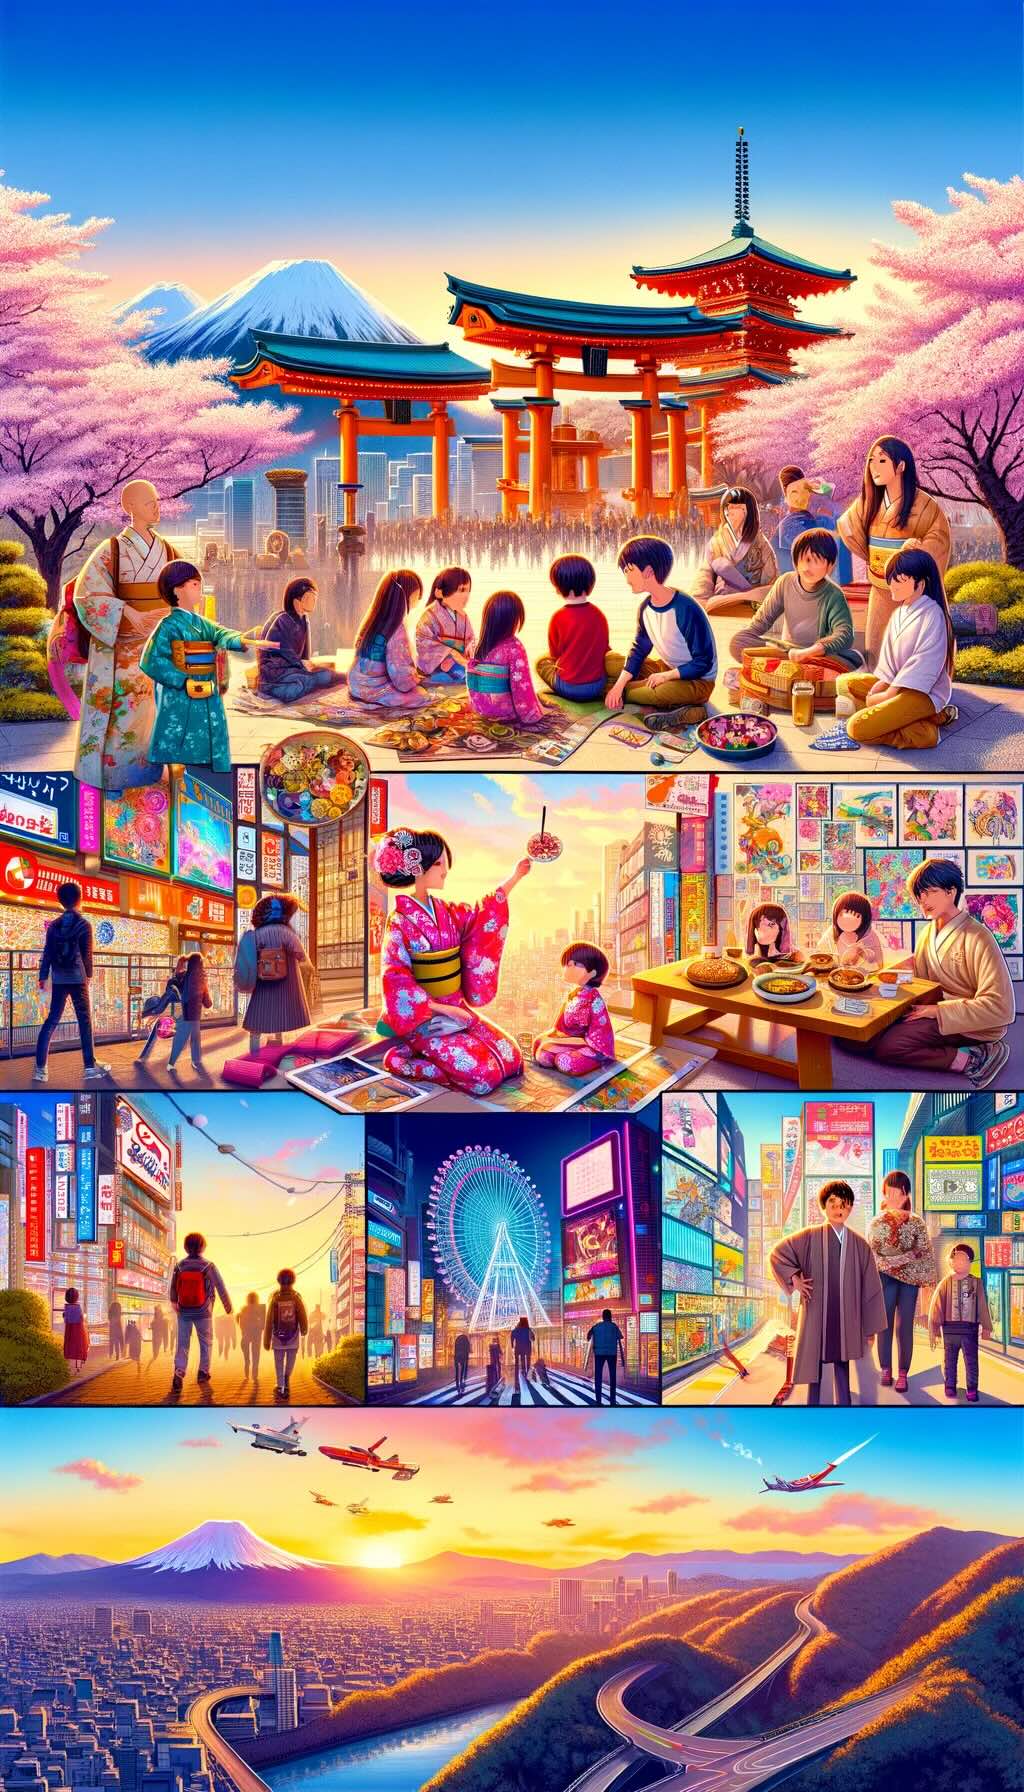 Family-friendly activities and spots in Japan showcases iconic landmarks and experiences, from enjoying cherry blossoms to exploring technological marvels in Tokyo, participating in traditional ceremonies, having fun at theme parks, and hiking in natural landscapes. This vibrant and colorful artwork is designed to evoke the essence of a family-friendly trip to Japan